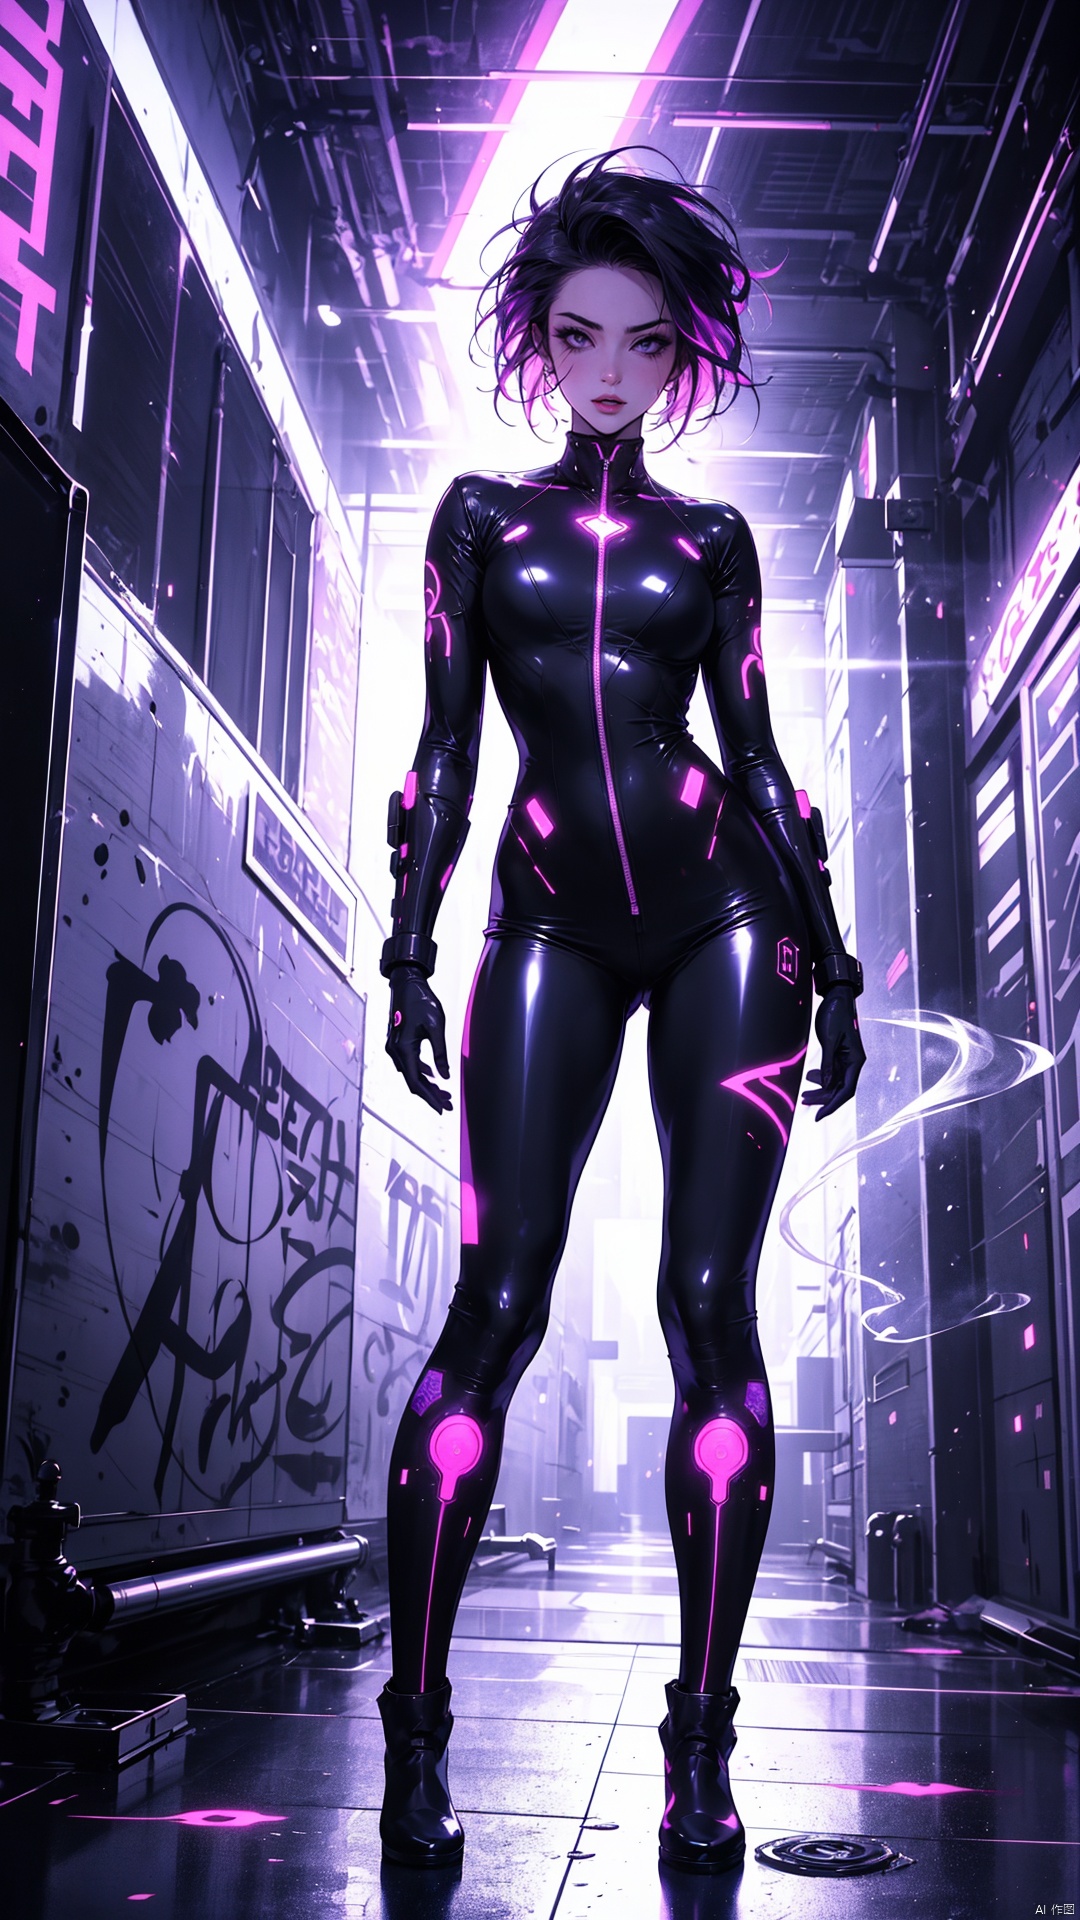 cyberpunk seductress, short purple hair, form-fitting catsuit, glowing circuit tattoos, neon-lit alleyway,半透明材质revealing lingerie underneath, thigh-high boots, leaning against graffiti wall, pouty lips, (erotic NSFW), smoking cybernetic cigarette, energy blade holstered on thigh, vibrant holographic backdrop, low-angle shot with dramatic lighting, deep focus, r1ge, blending into the digital matrix 